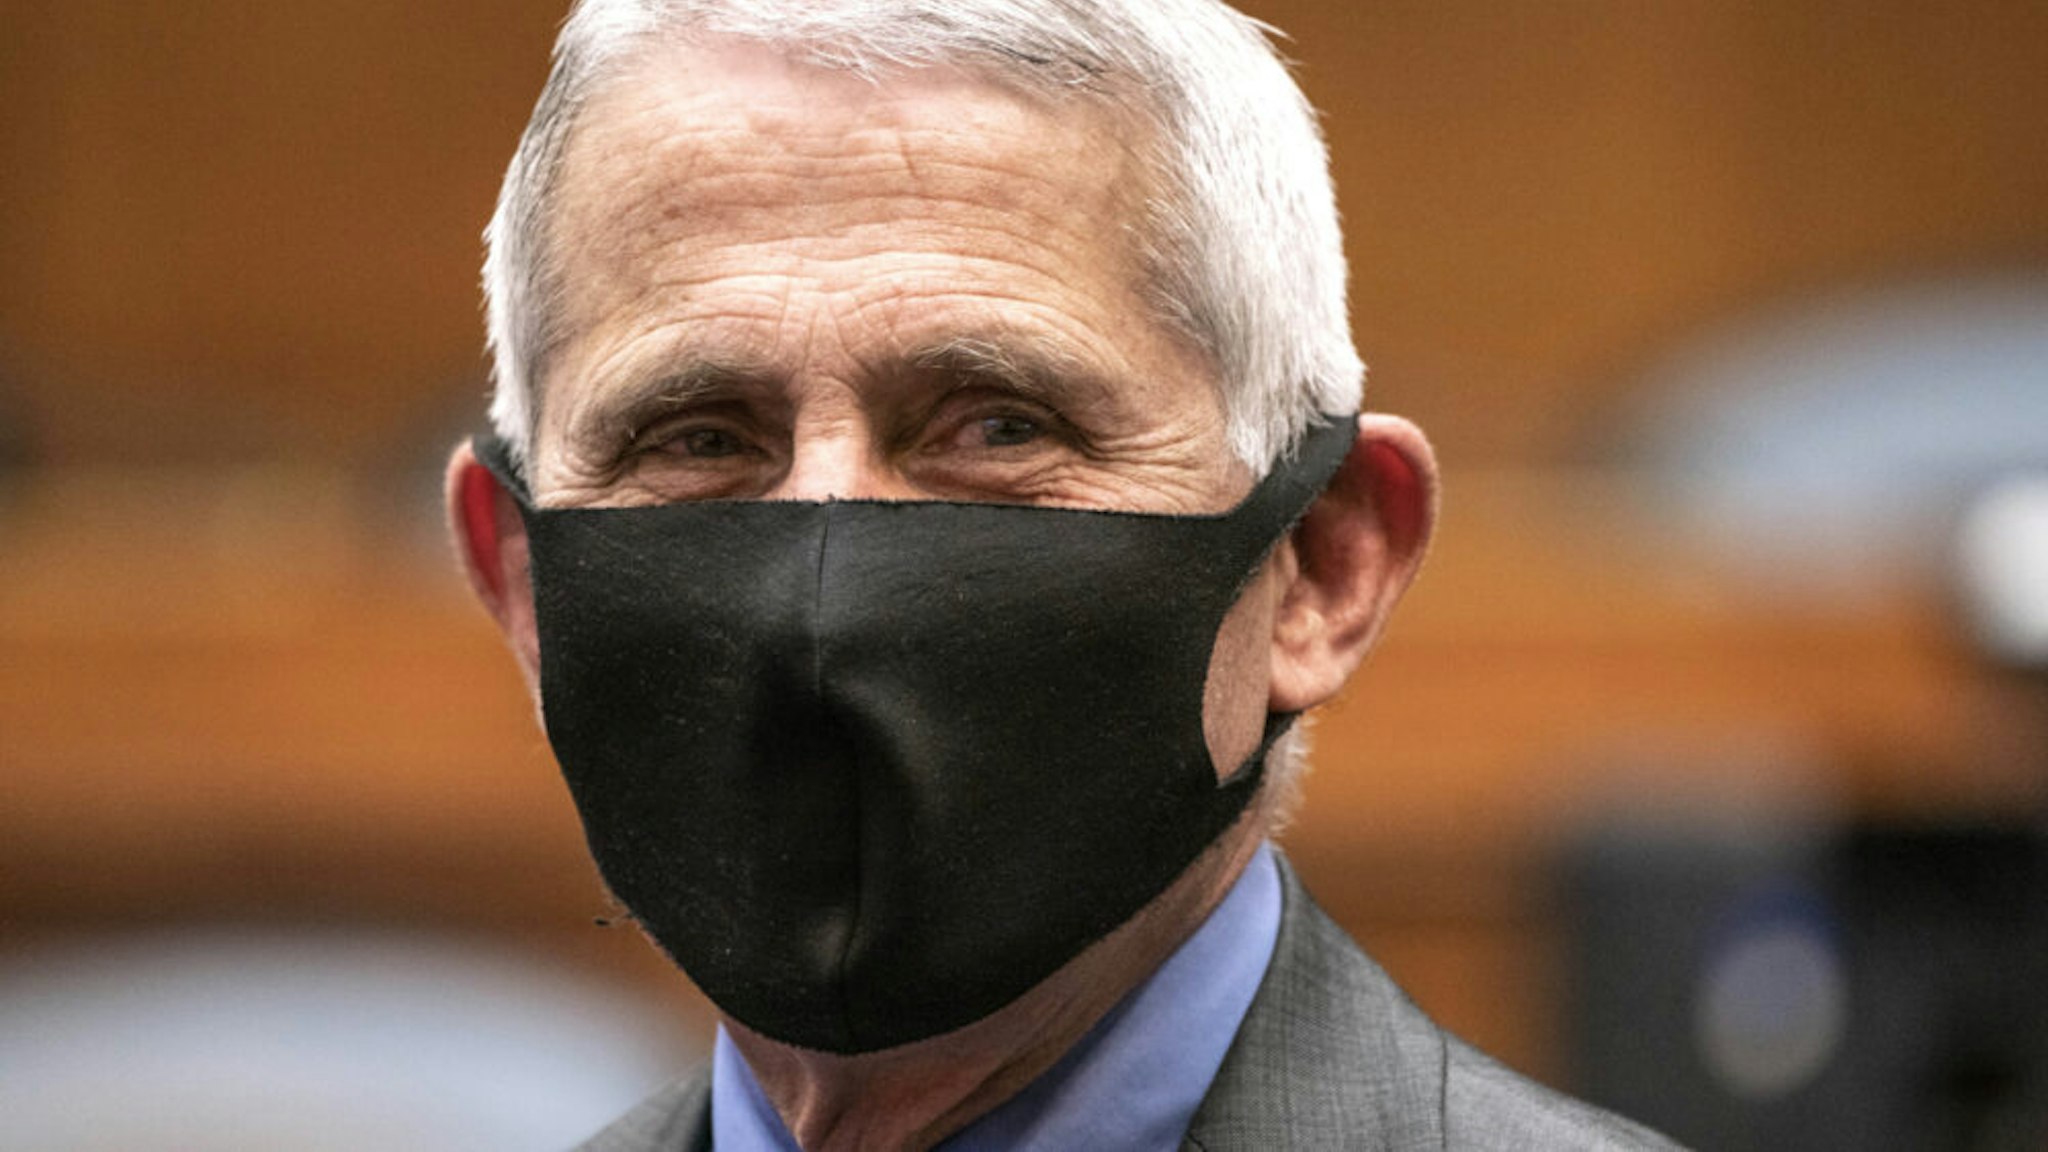 WASHINGTON, DC - JUNE 23: Anthony Fauci, director of the National Institute of Allergy and Infectious Diseases, prepares to testify before a hearing of the House Committee on Energy and Commerce on Capitol Hill on June 23, 2020 in Washington, DC. The committee is investigating the Trump administration's response to the COVID-19 pandemic.